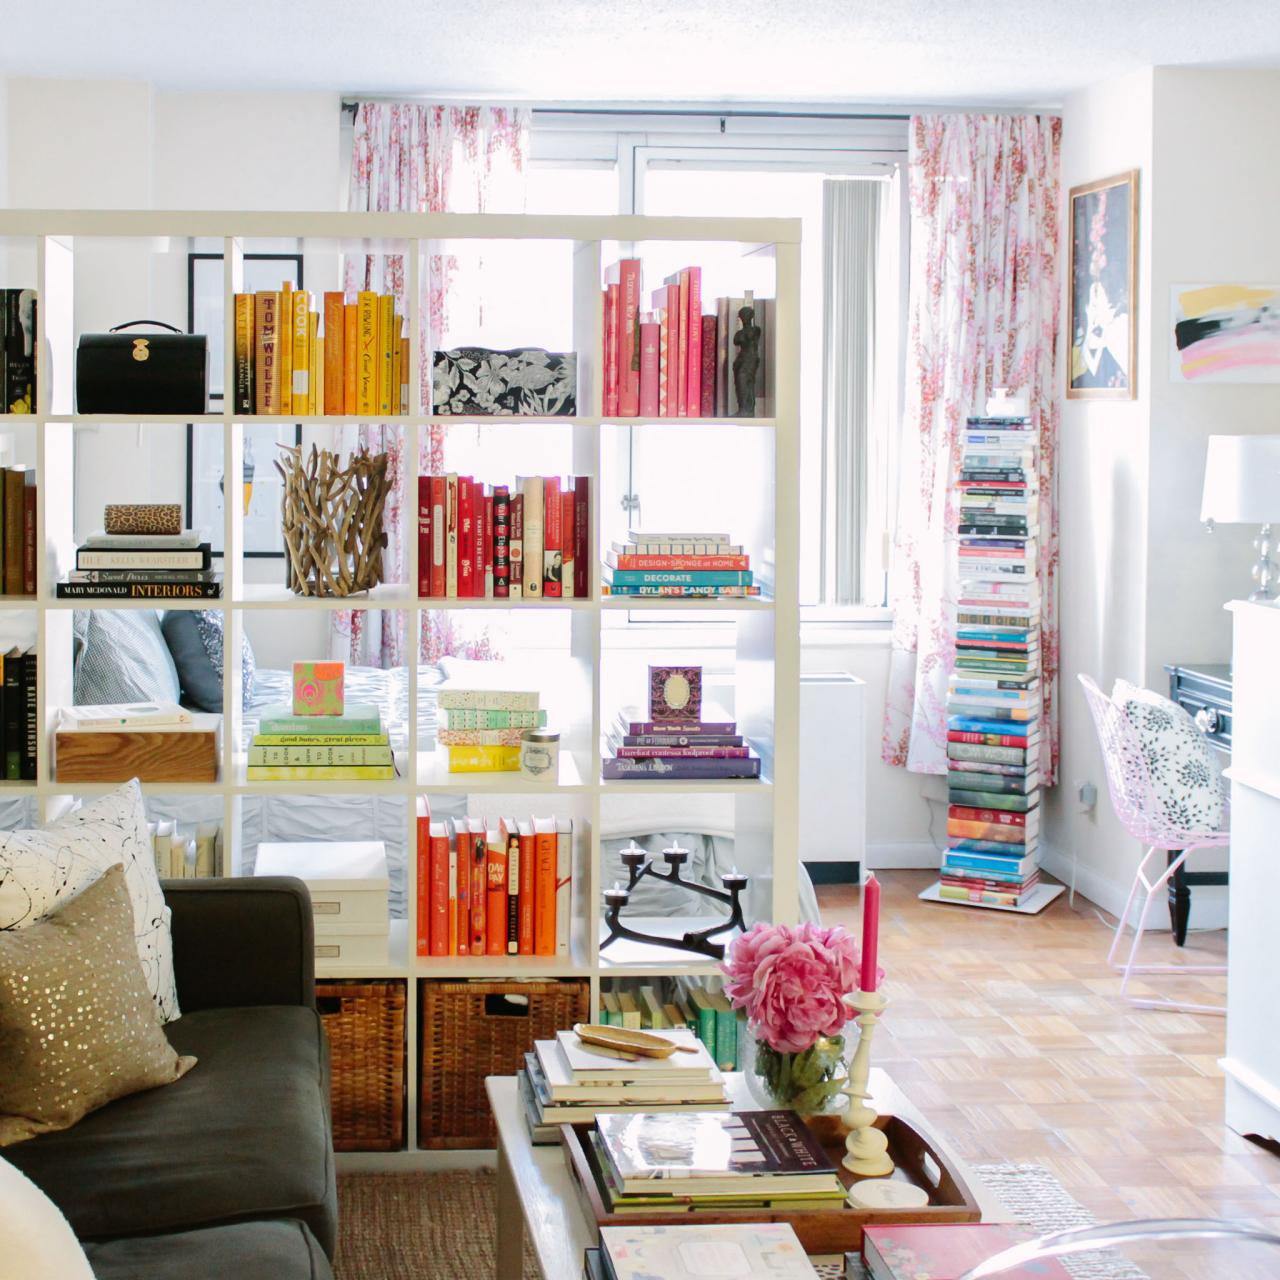 50 Tiny Apartment Storage and Shelving Ideas that Work for Everyone!